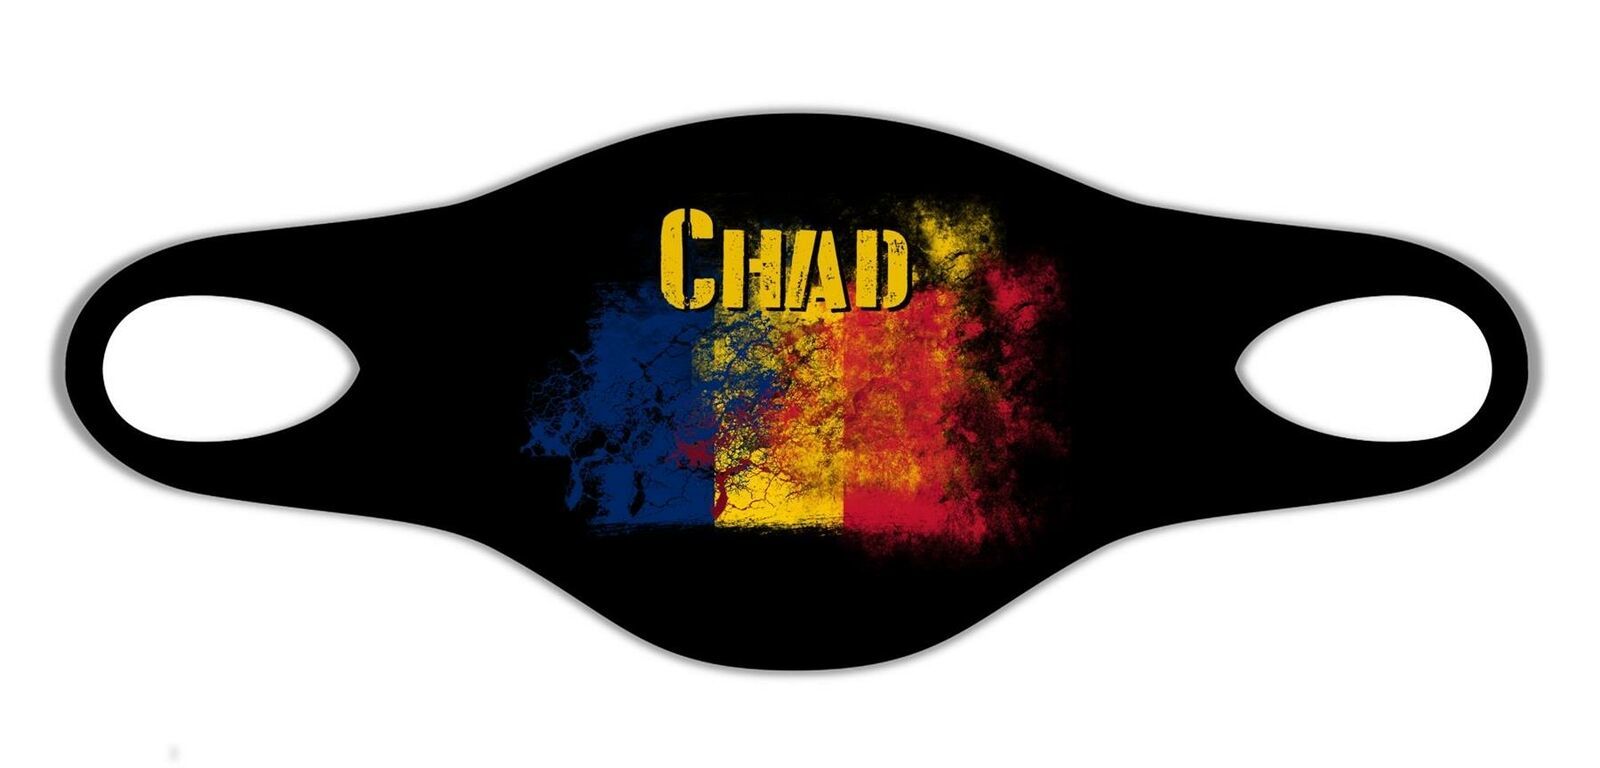 Chad National Flag Soft Face Mask Protective Reusable washable Breathable